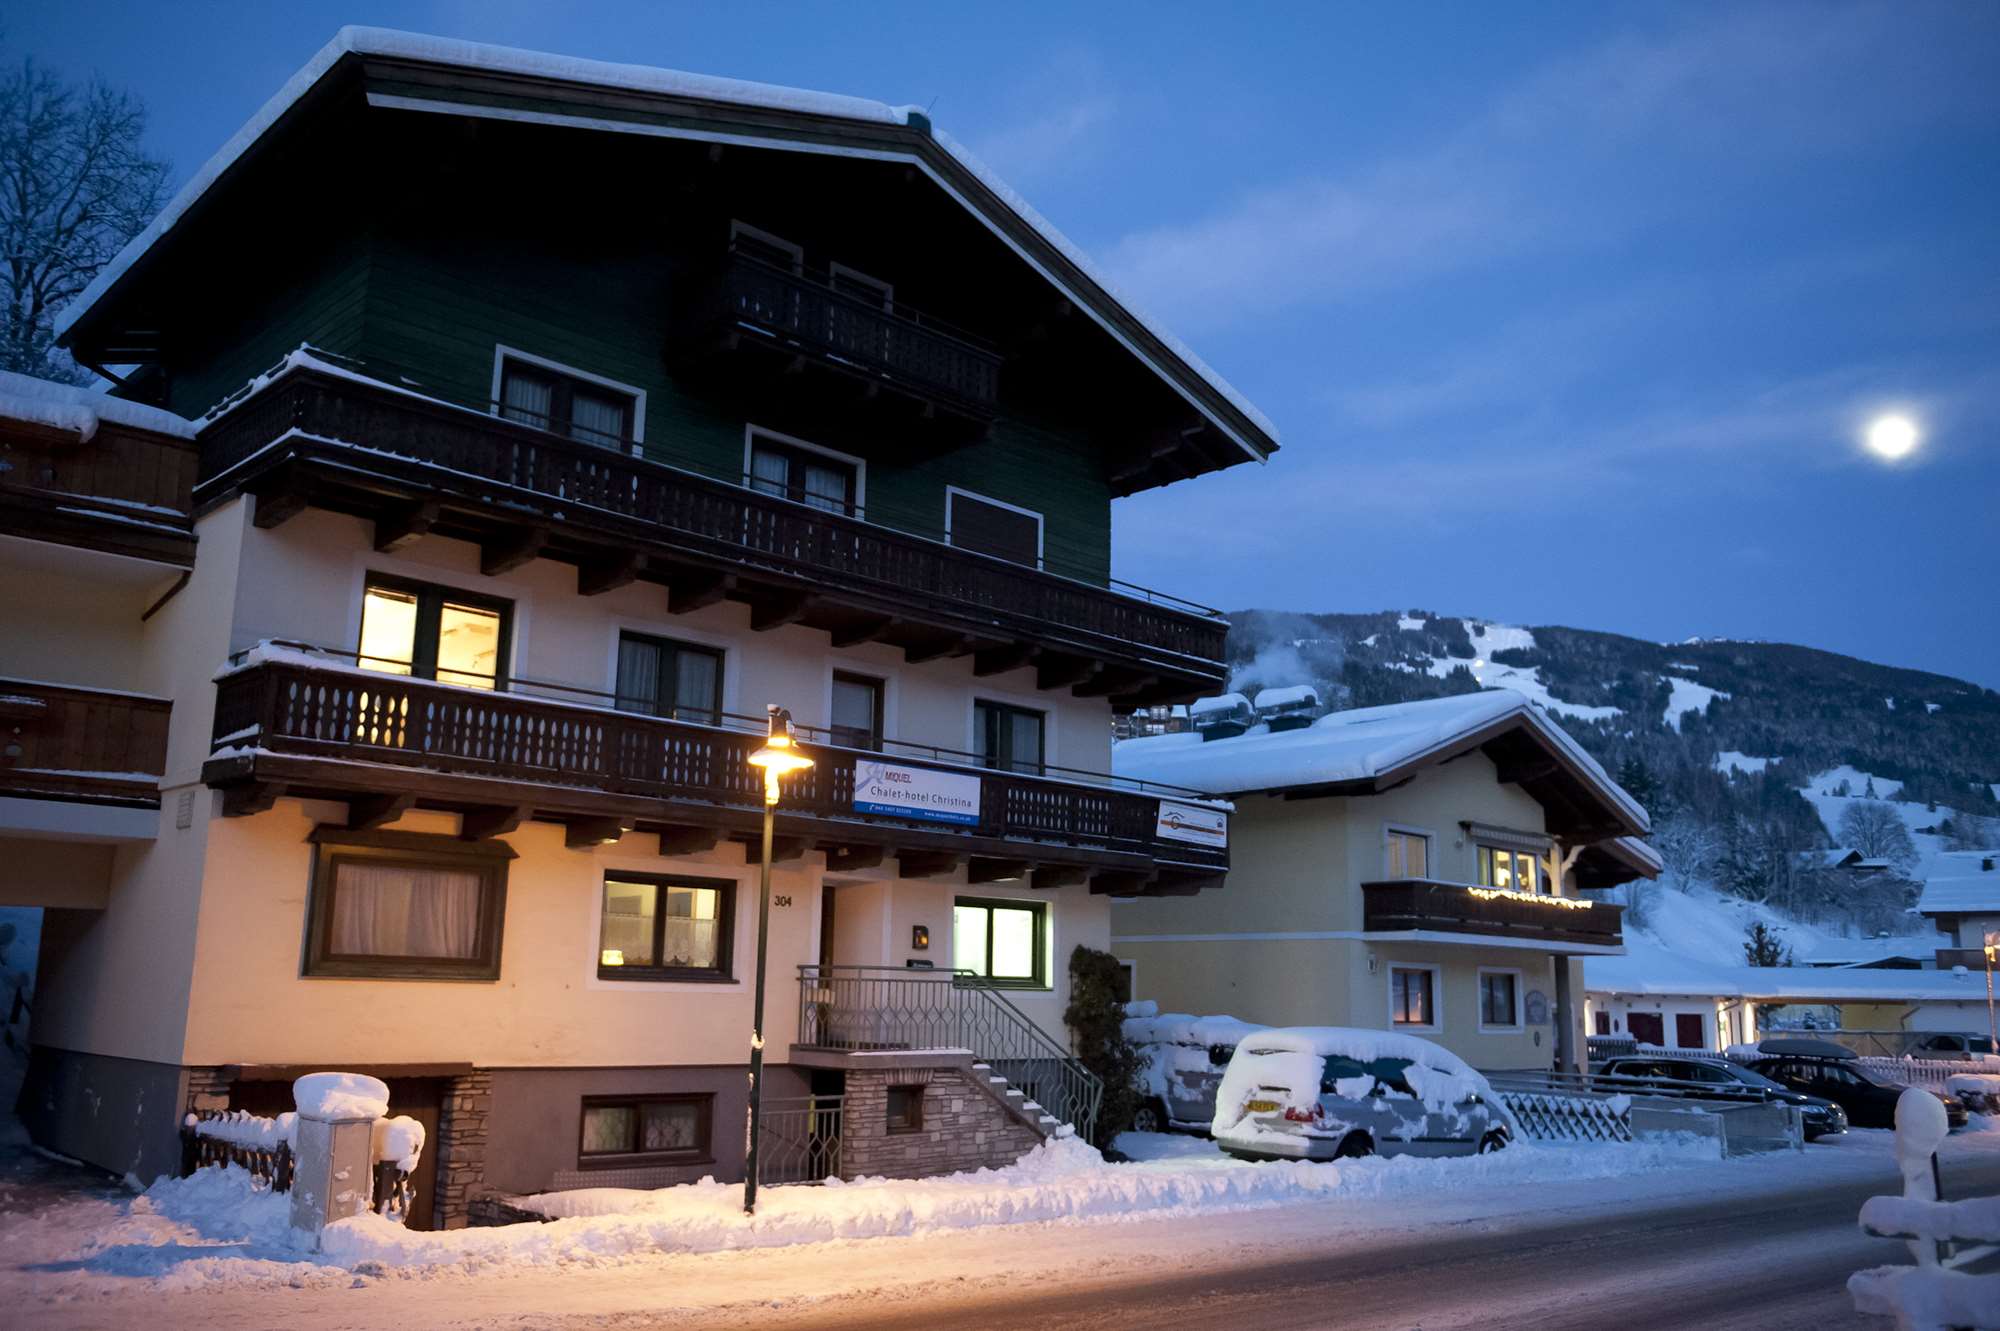 The Chalet Christina in Saalbach at dusk